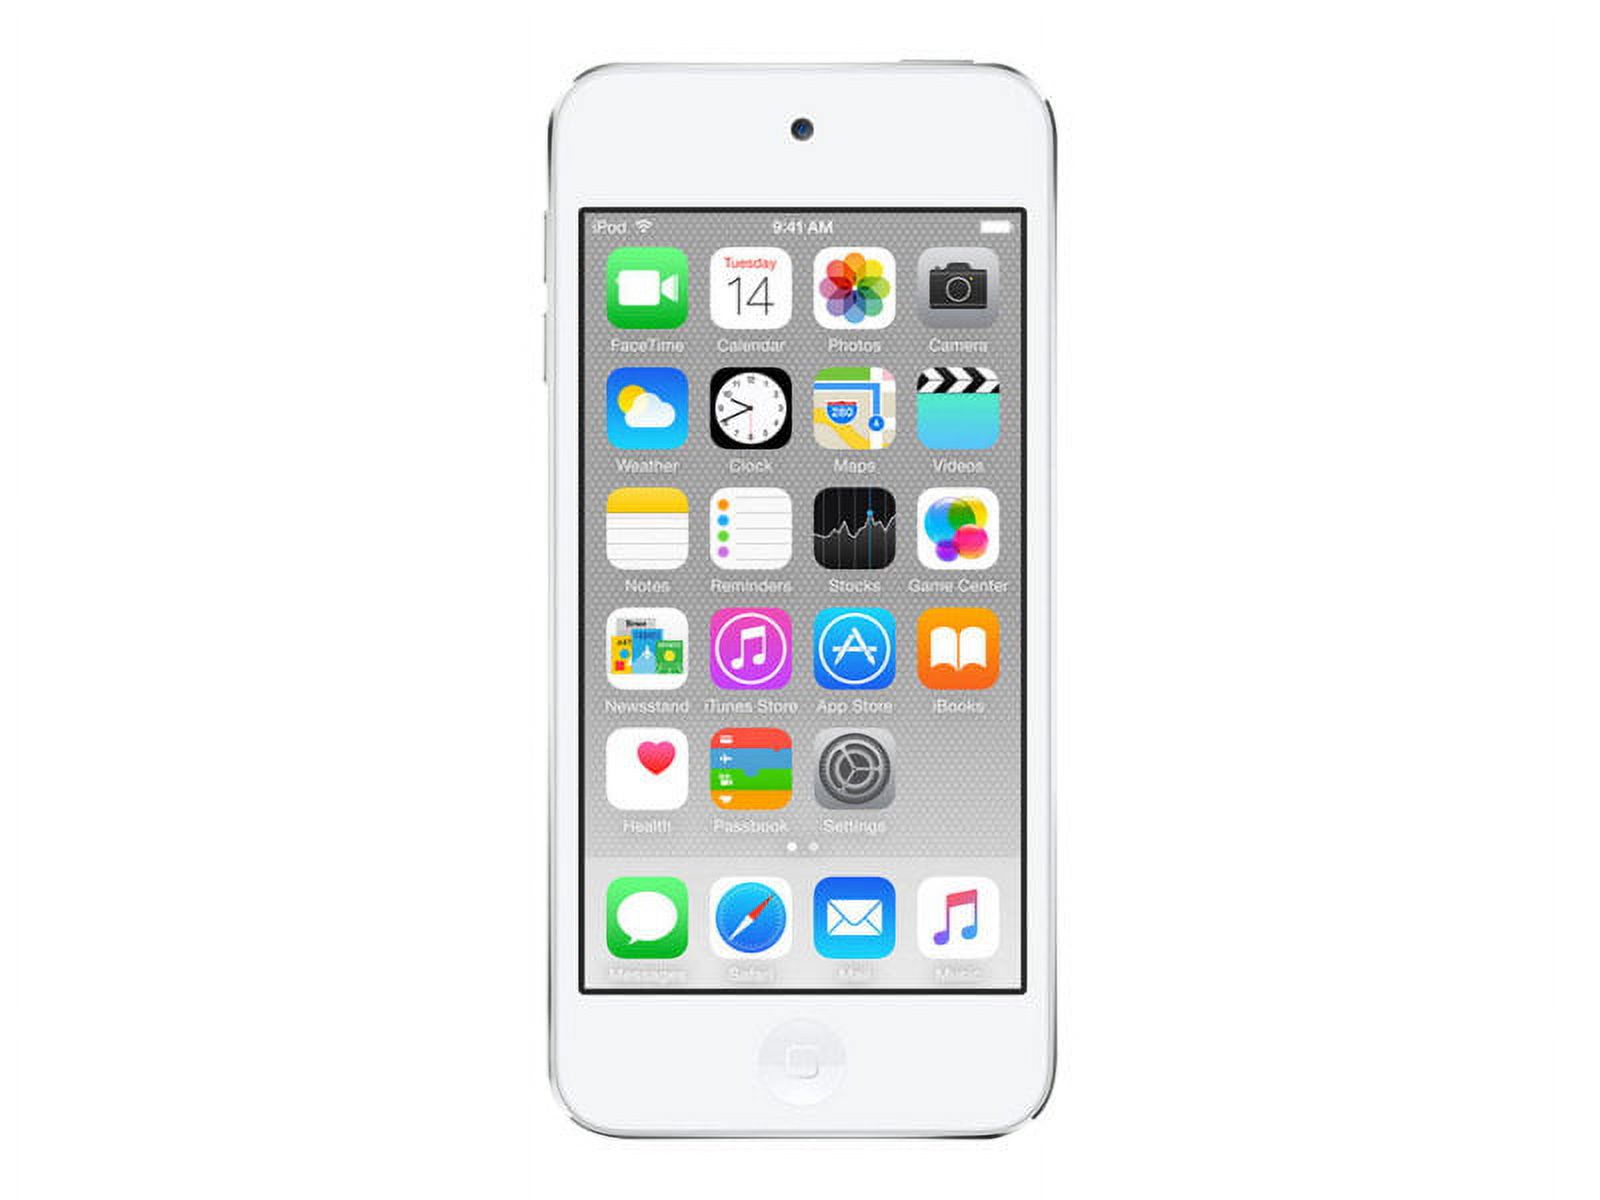 Apple iPod touch - 6th generation - digital player - Apple iOS 12 - 64 GB - silver - image 2 of 5